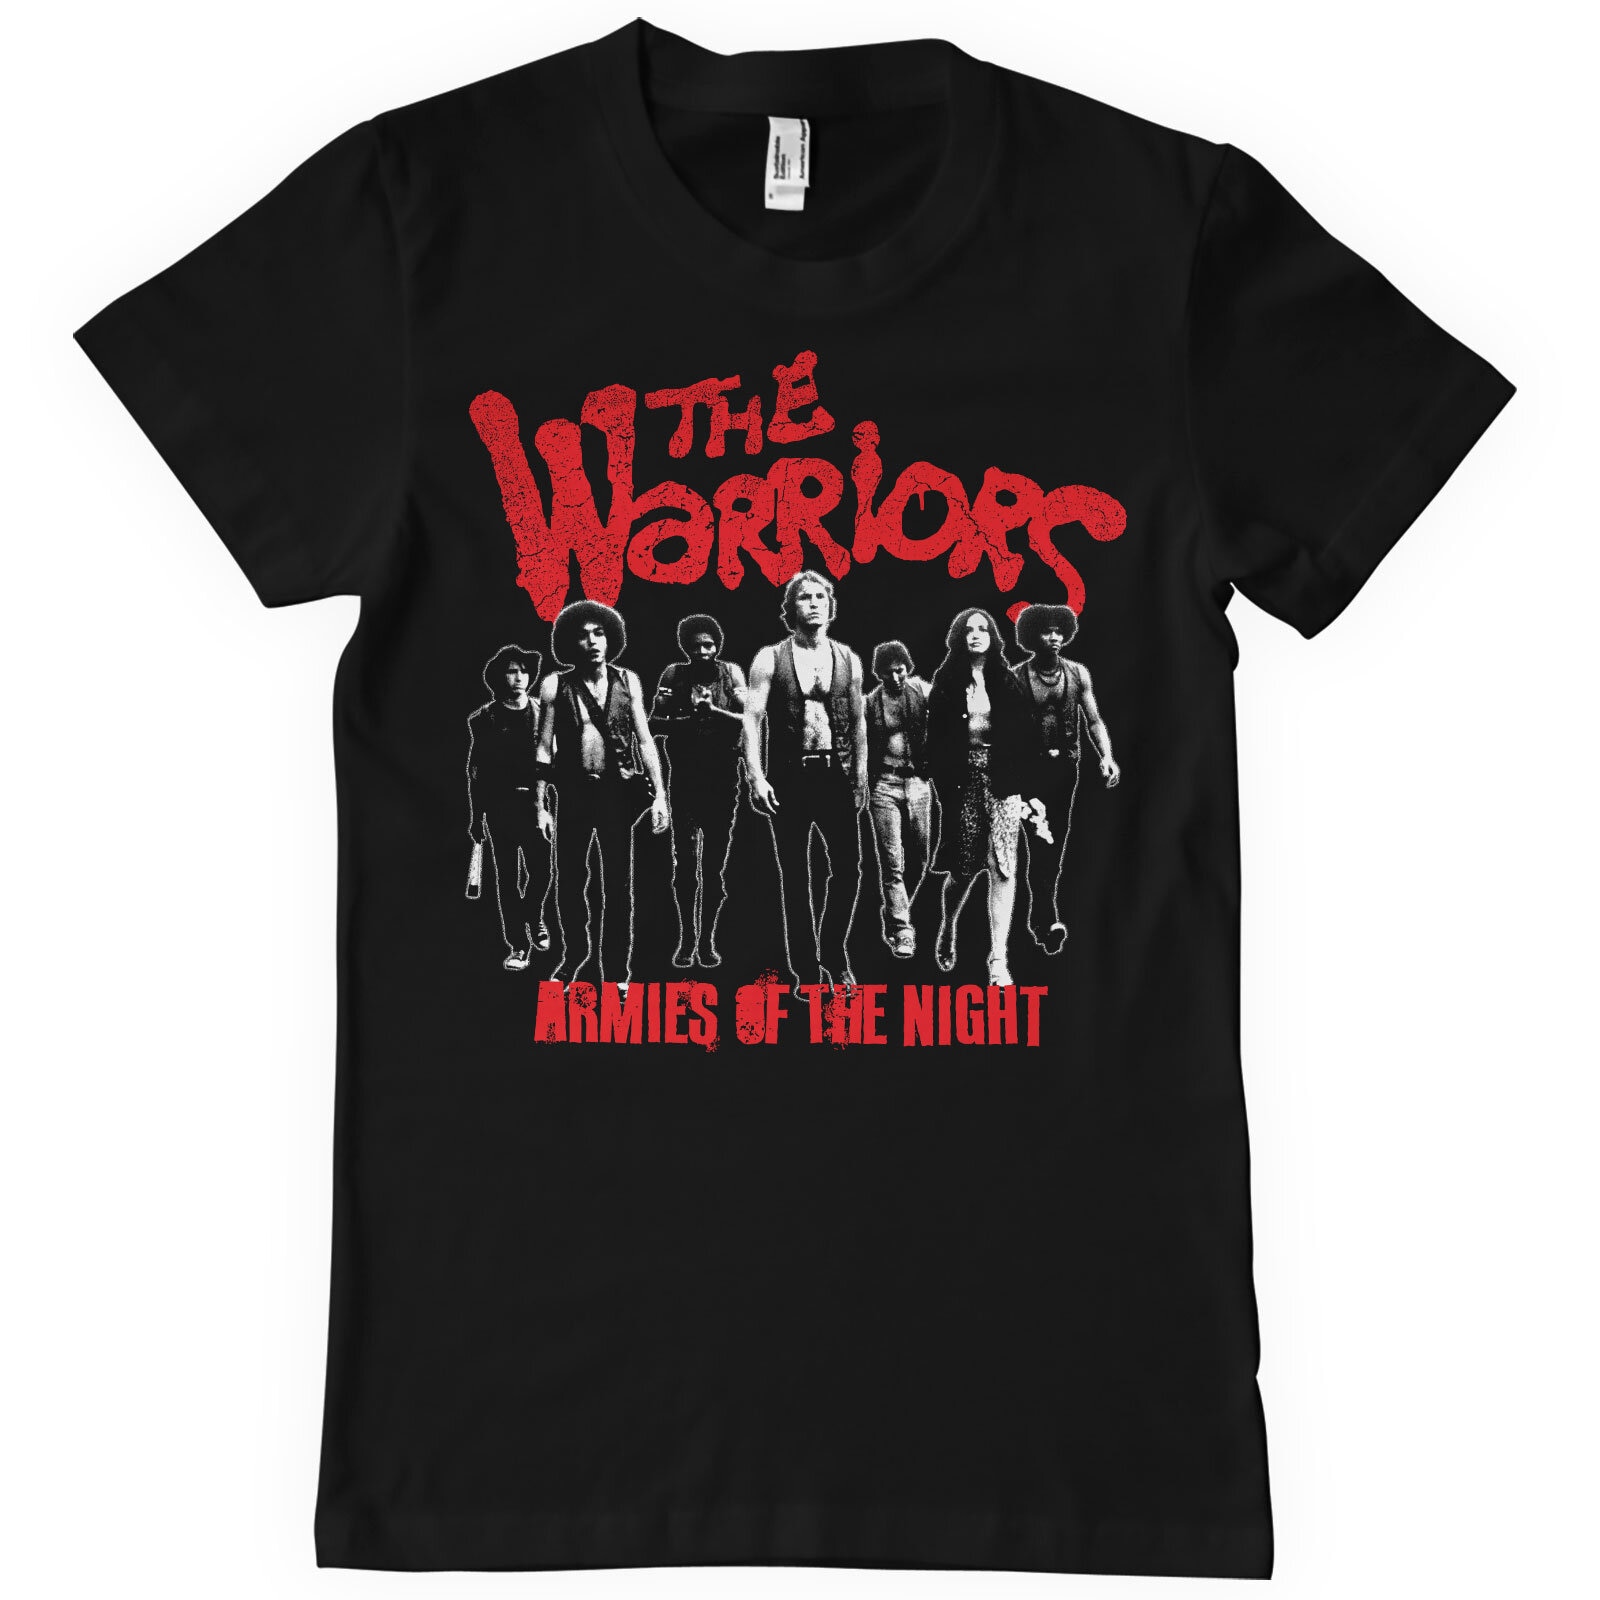 The Warriors - Armies Of The Night T-Shirt